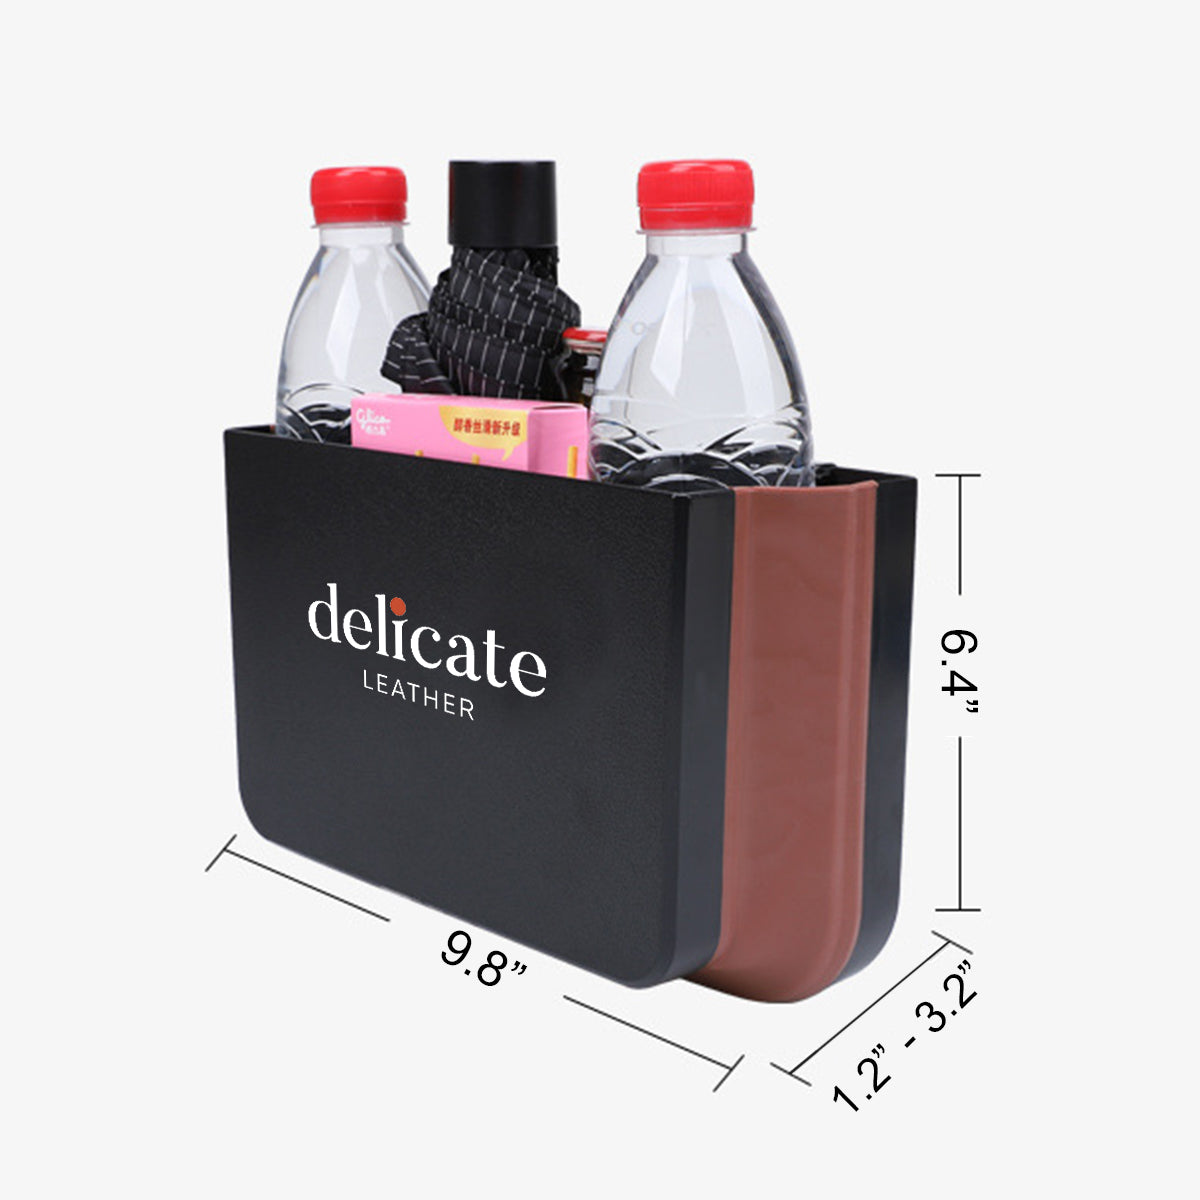 Hanging Waterproof Car Trash can-Foldable, Custom For Your Cars, Waterproof, and Equipped with Cup Holders and Trays. Multi-Purpose, Car Accessories KO11992 - Delicate Leather